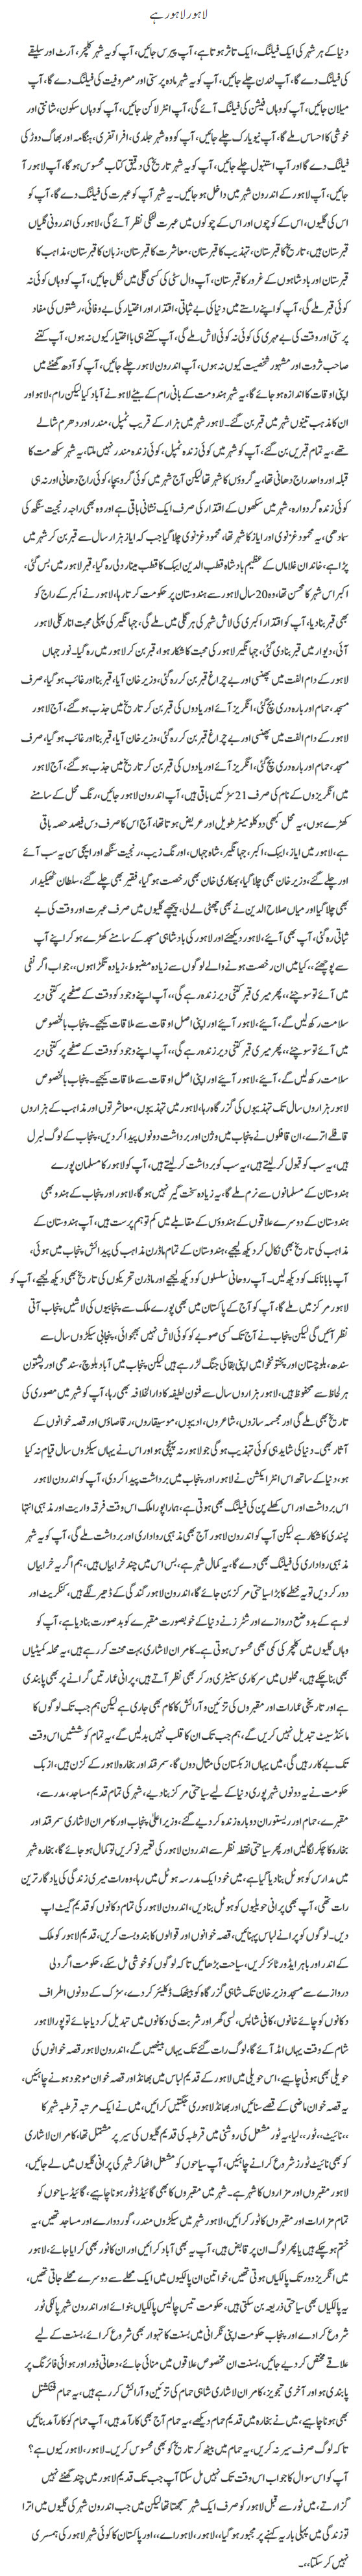 Lahore Lahore hai by Javed Chaudhry